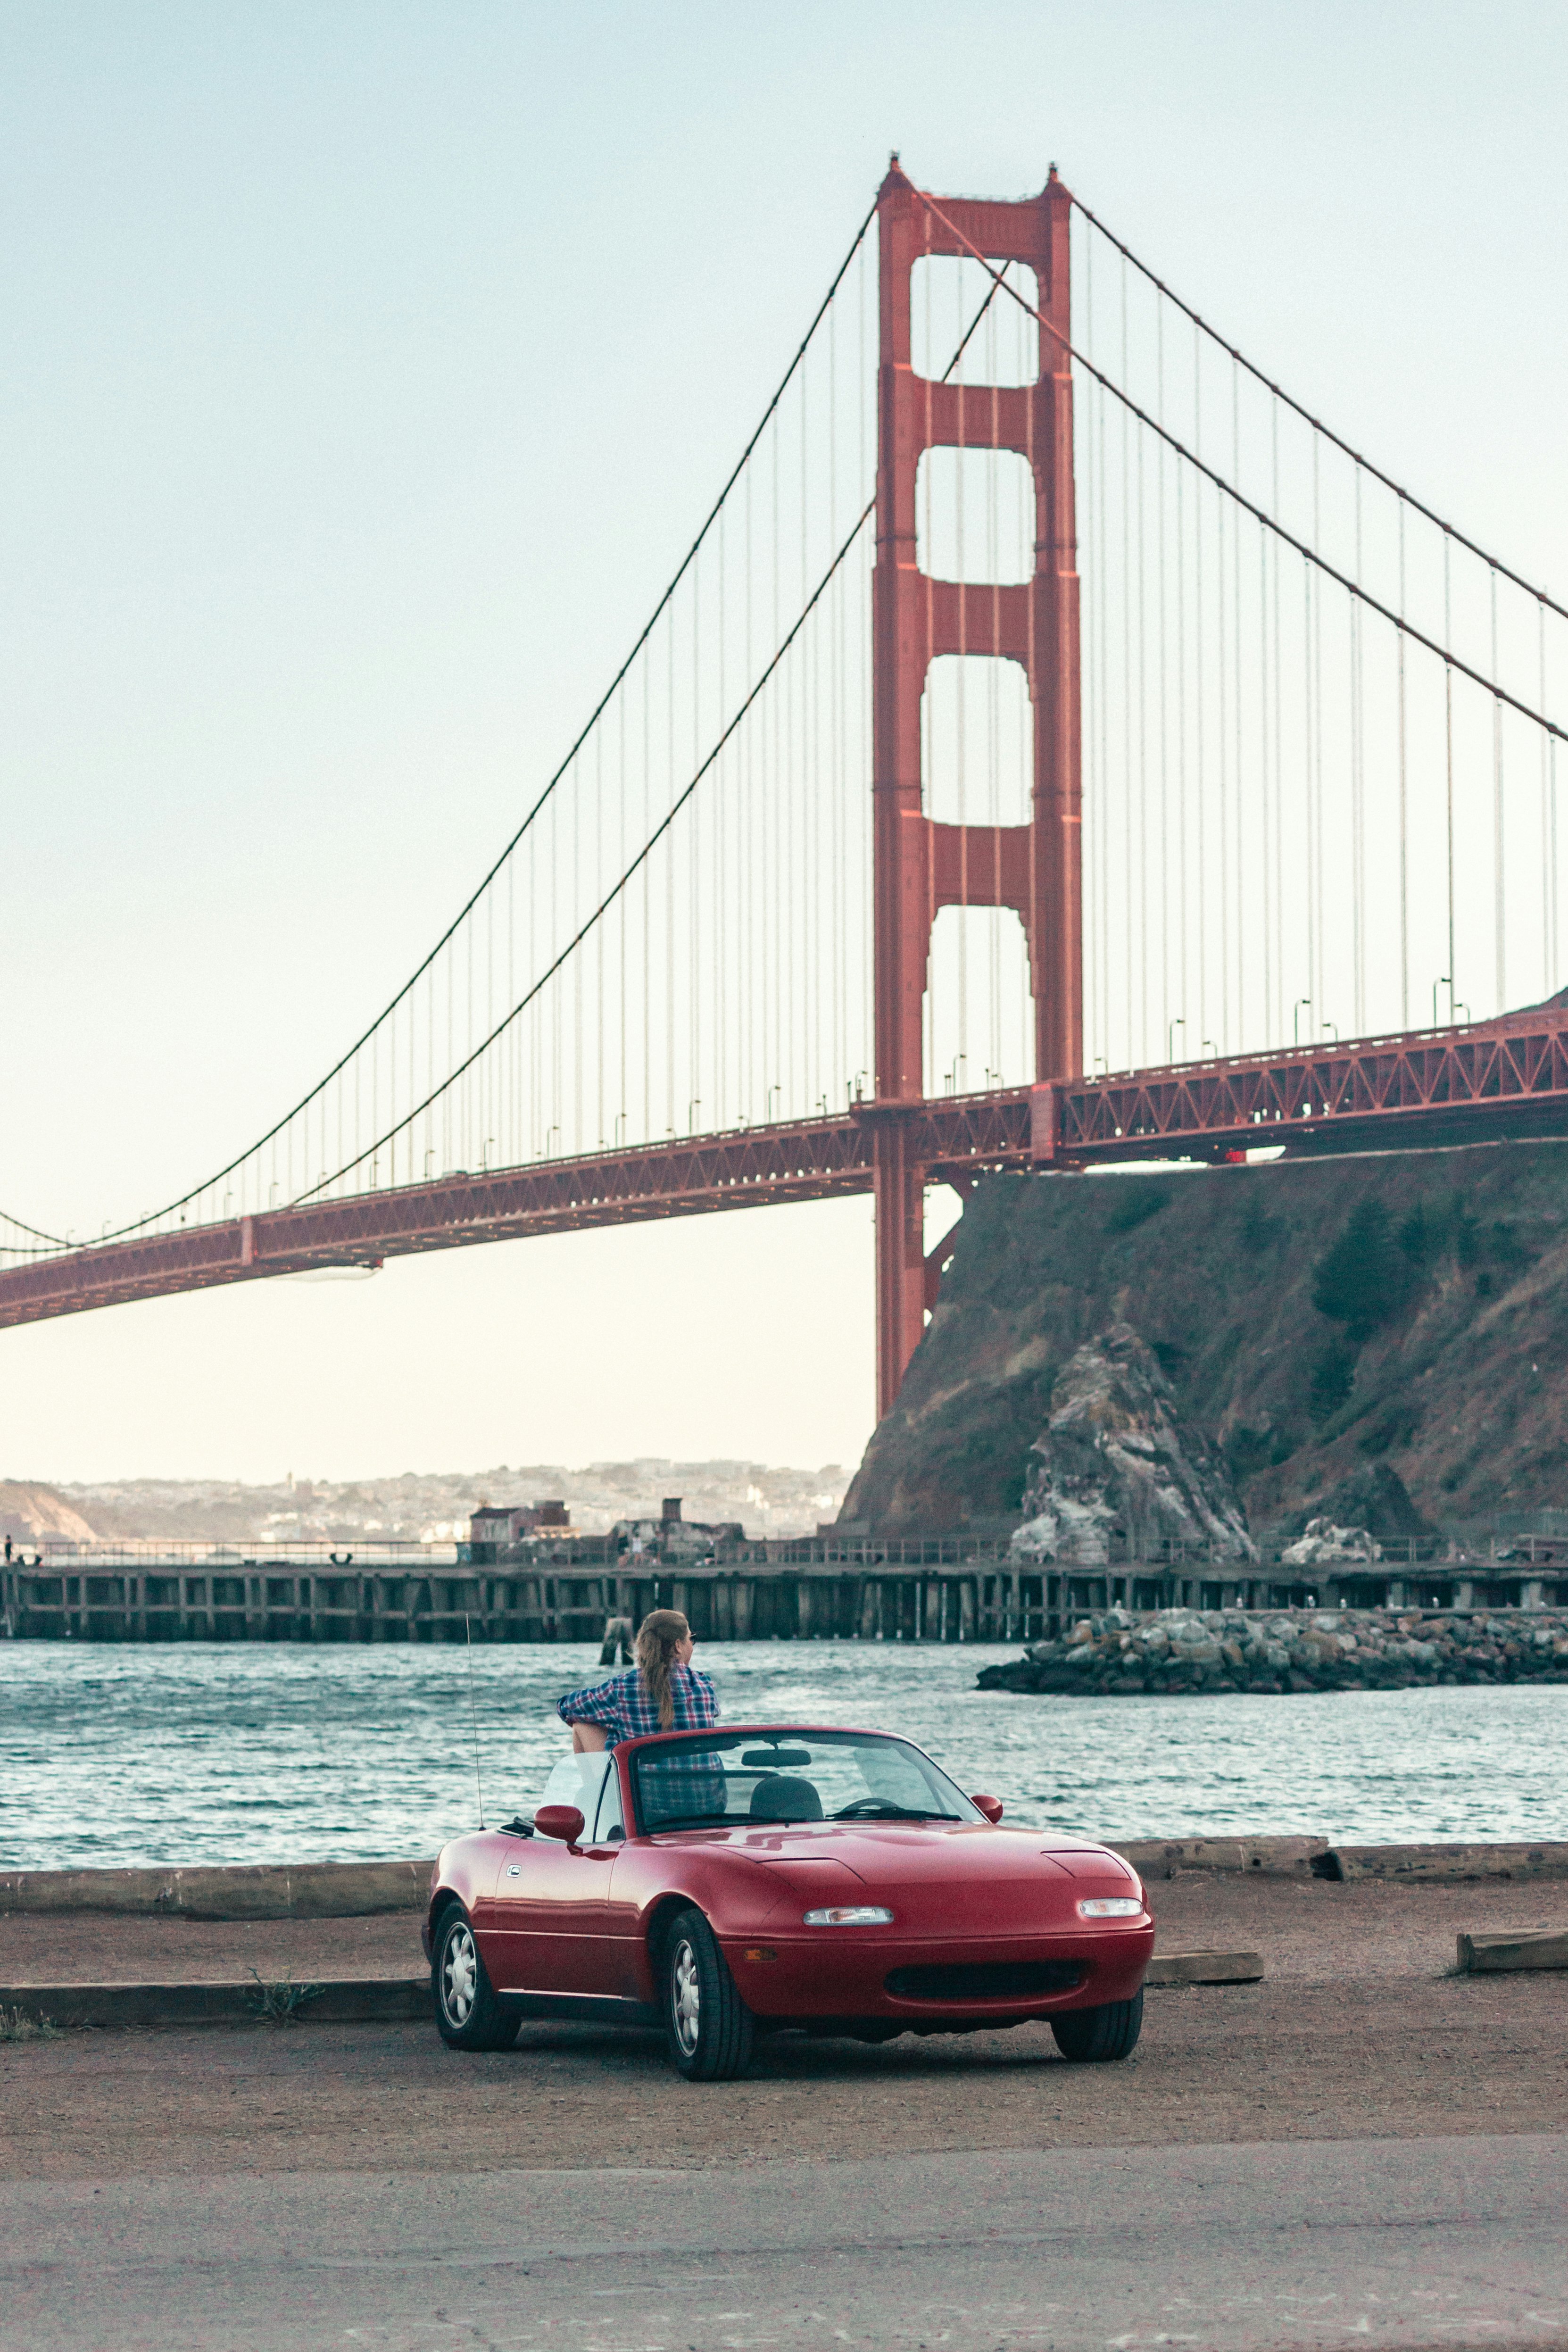 red and white convertible car on bridge during daytime